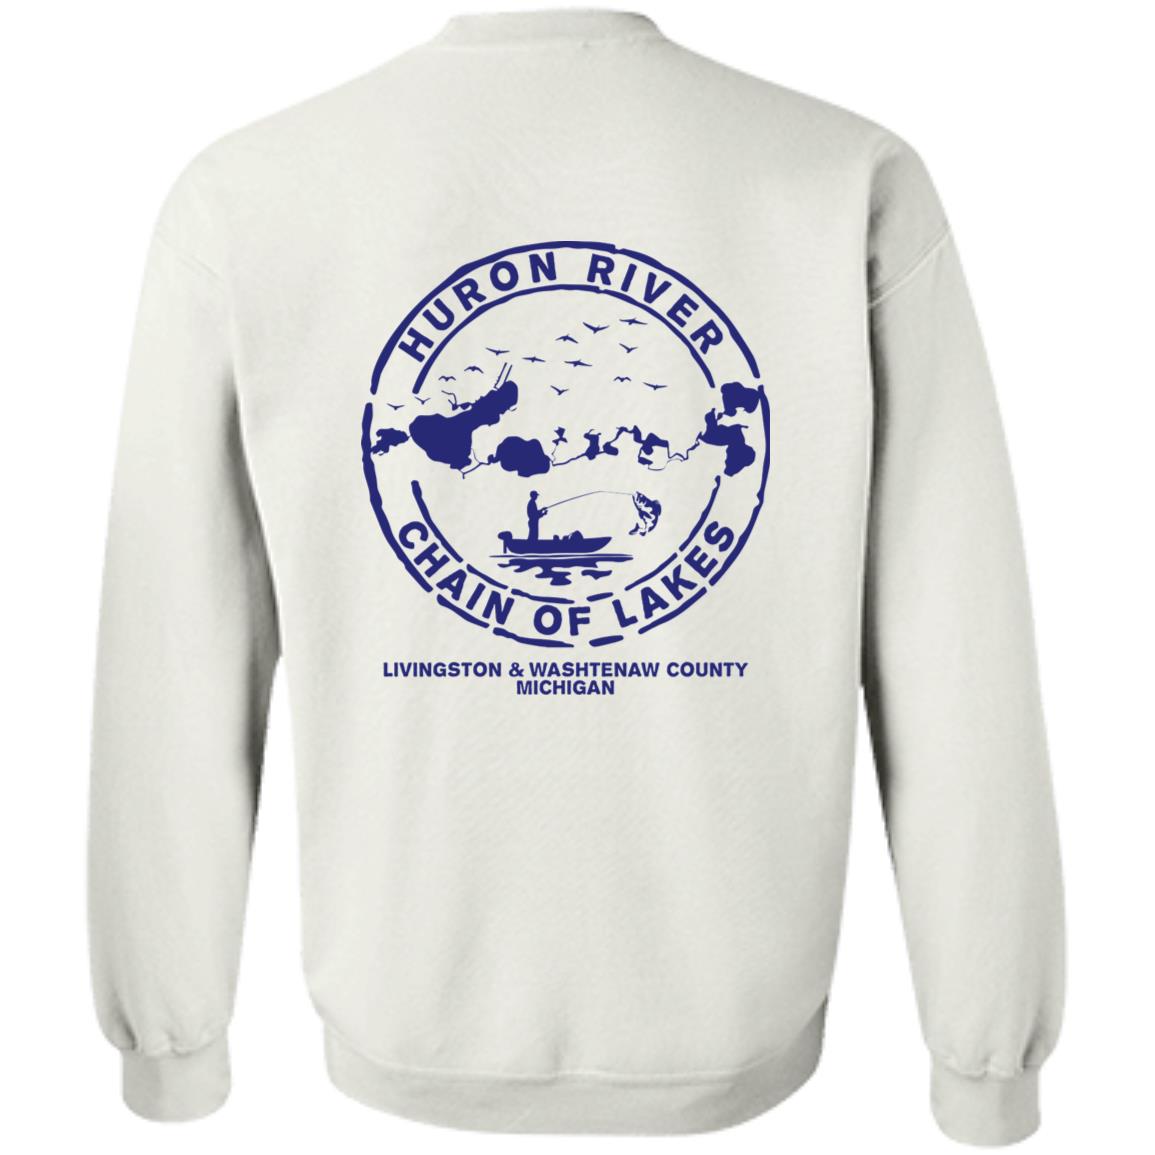 ***2 SIDED***  HRCL FL - Navy Boat.... Bust Out Another Thousand - 2 Sided G180 Crewneck Pullover Sweatshirt